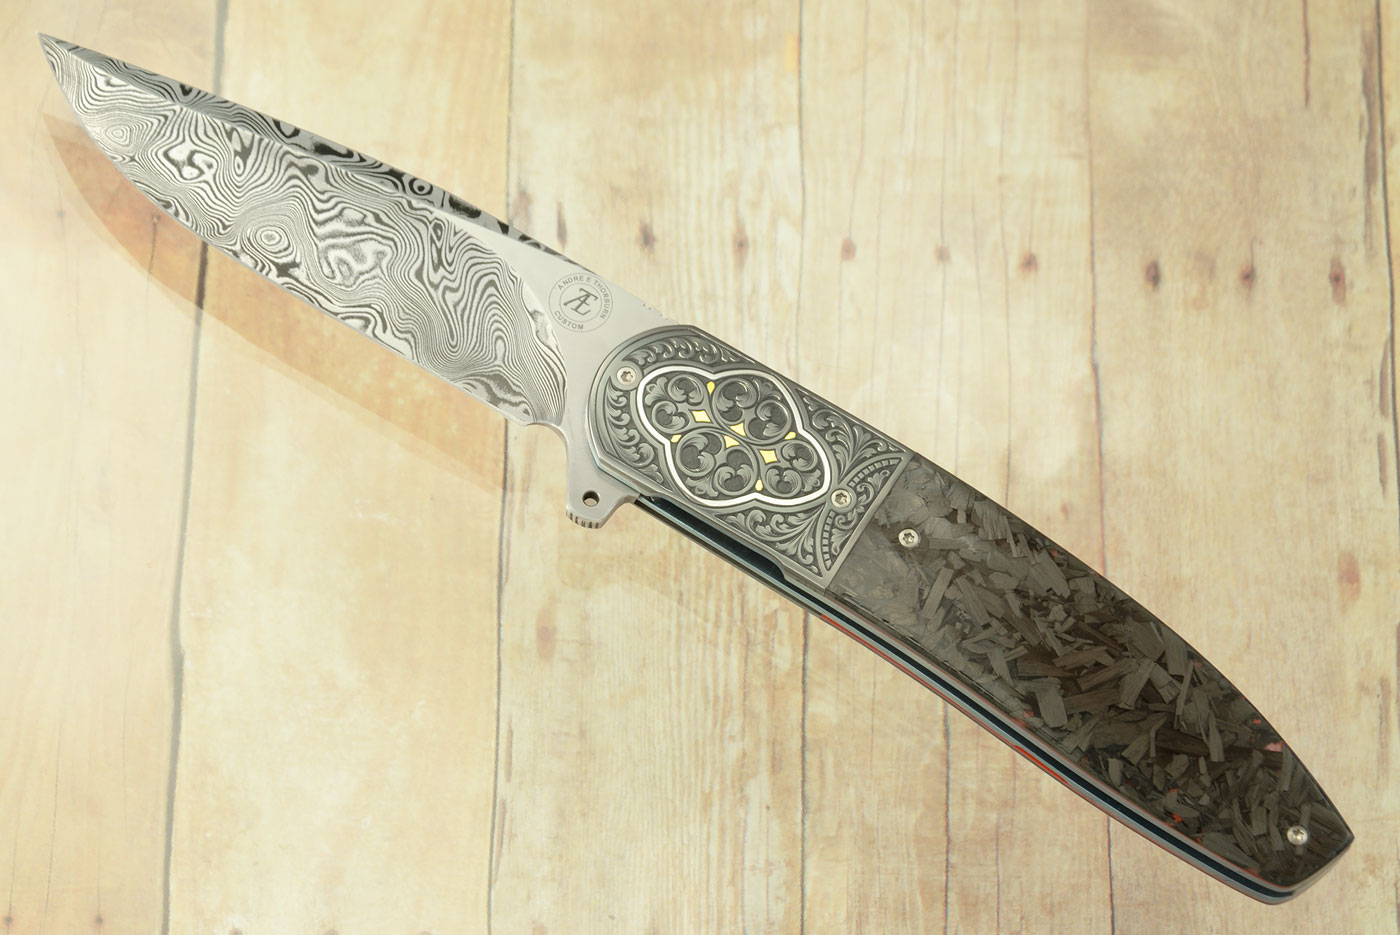 L28 Flipper with Shred Carbon Fiber, Damascus, and Engraved Zirconium with Gold and Silver Inlays (Ceramic IKBS)